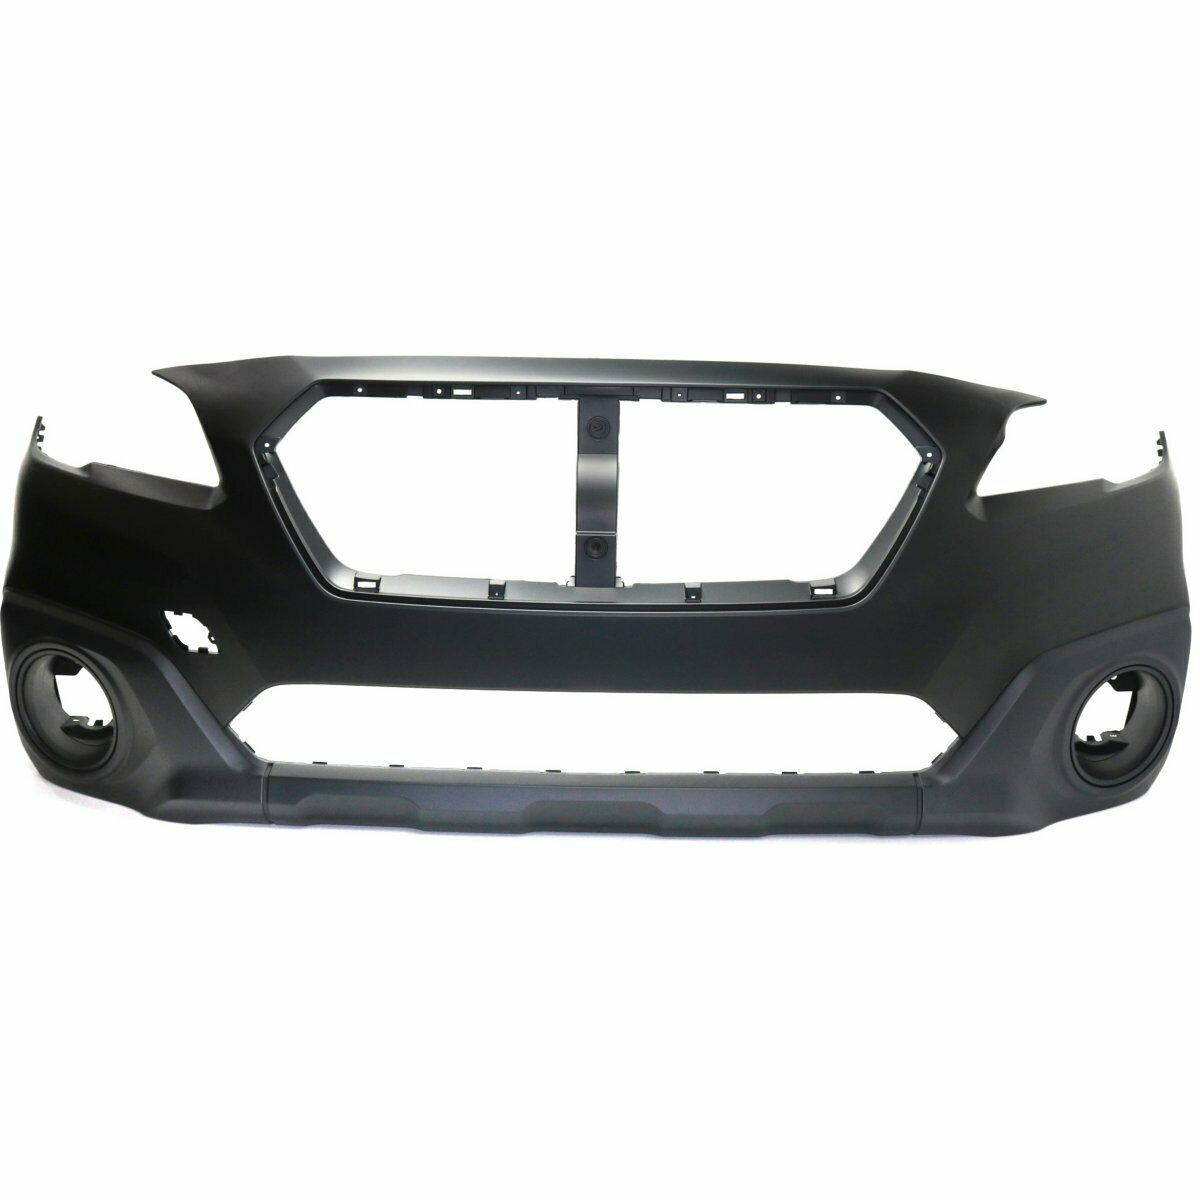 2015-2017 Subaru Outback Front Bumper Painted to Match